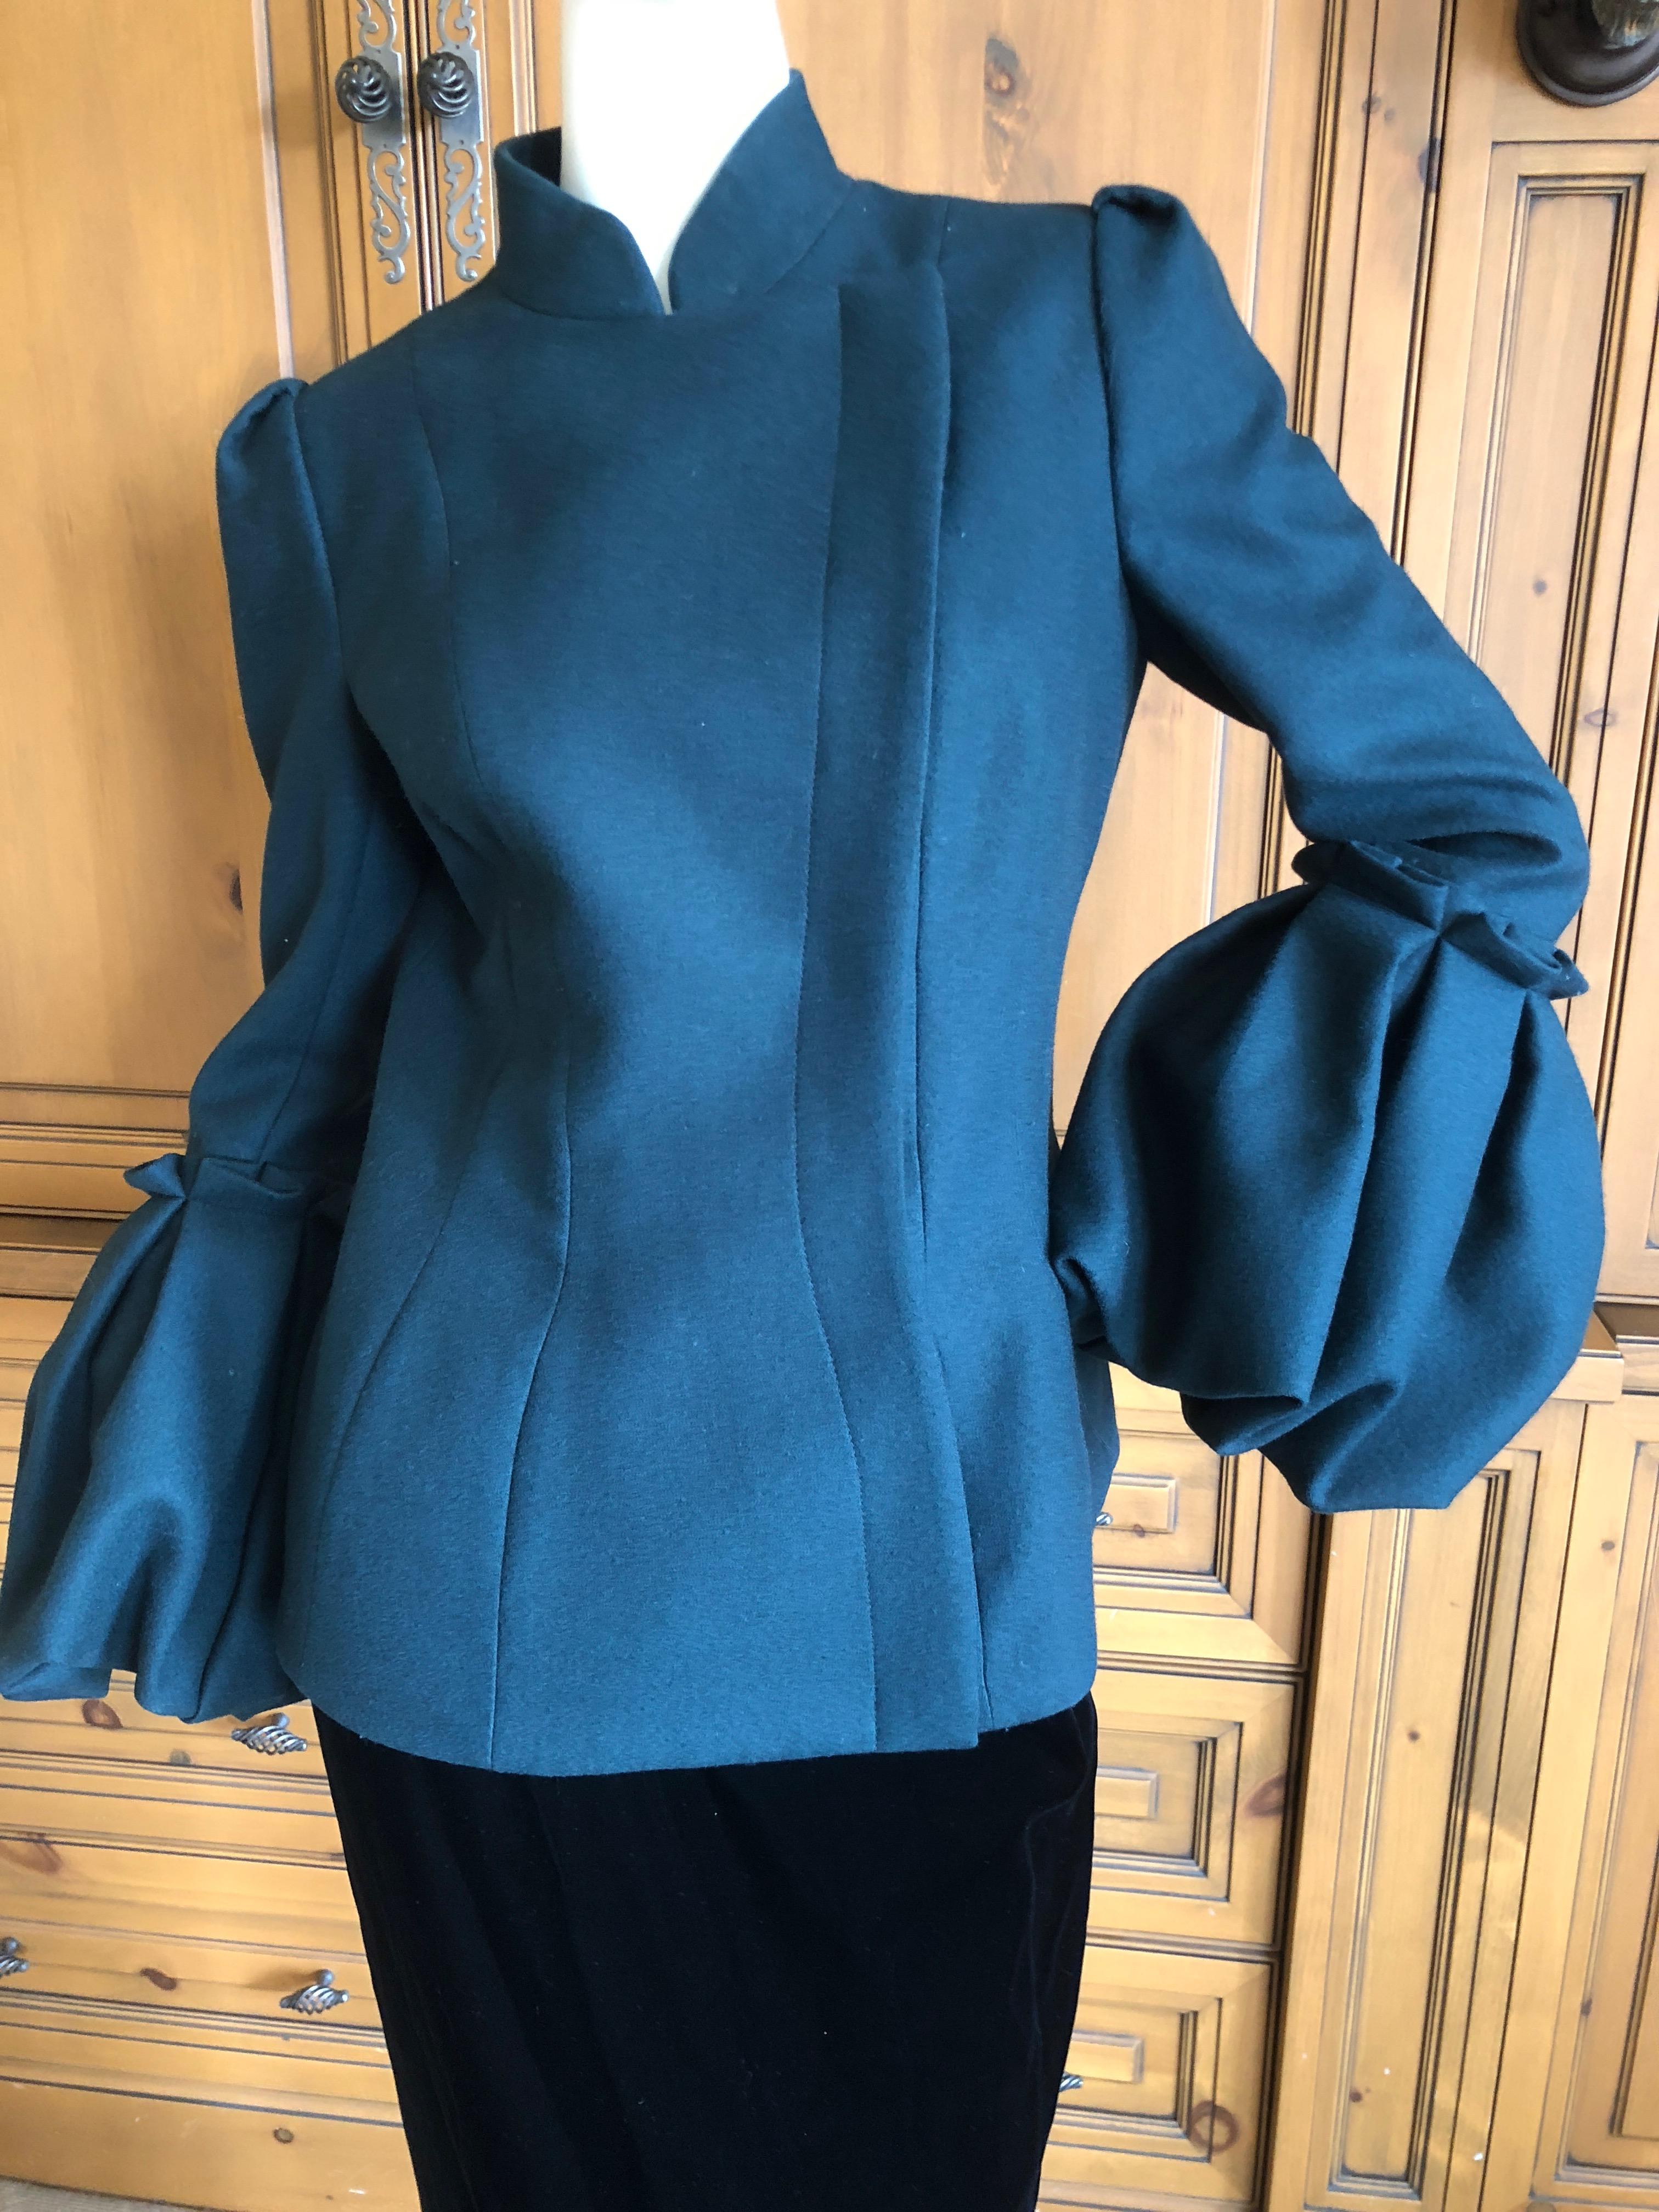 Alexander McQueen Teal Green Wool Jacket with Exaggerated Cuffs Size 42 In New Condition For Sale In Cloverdale, CA